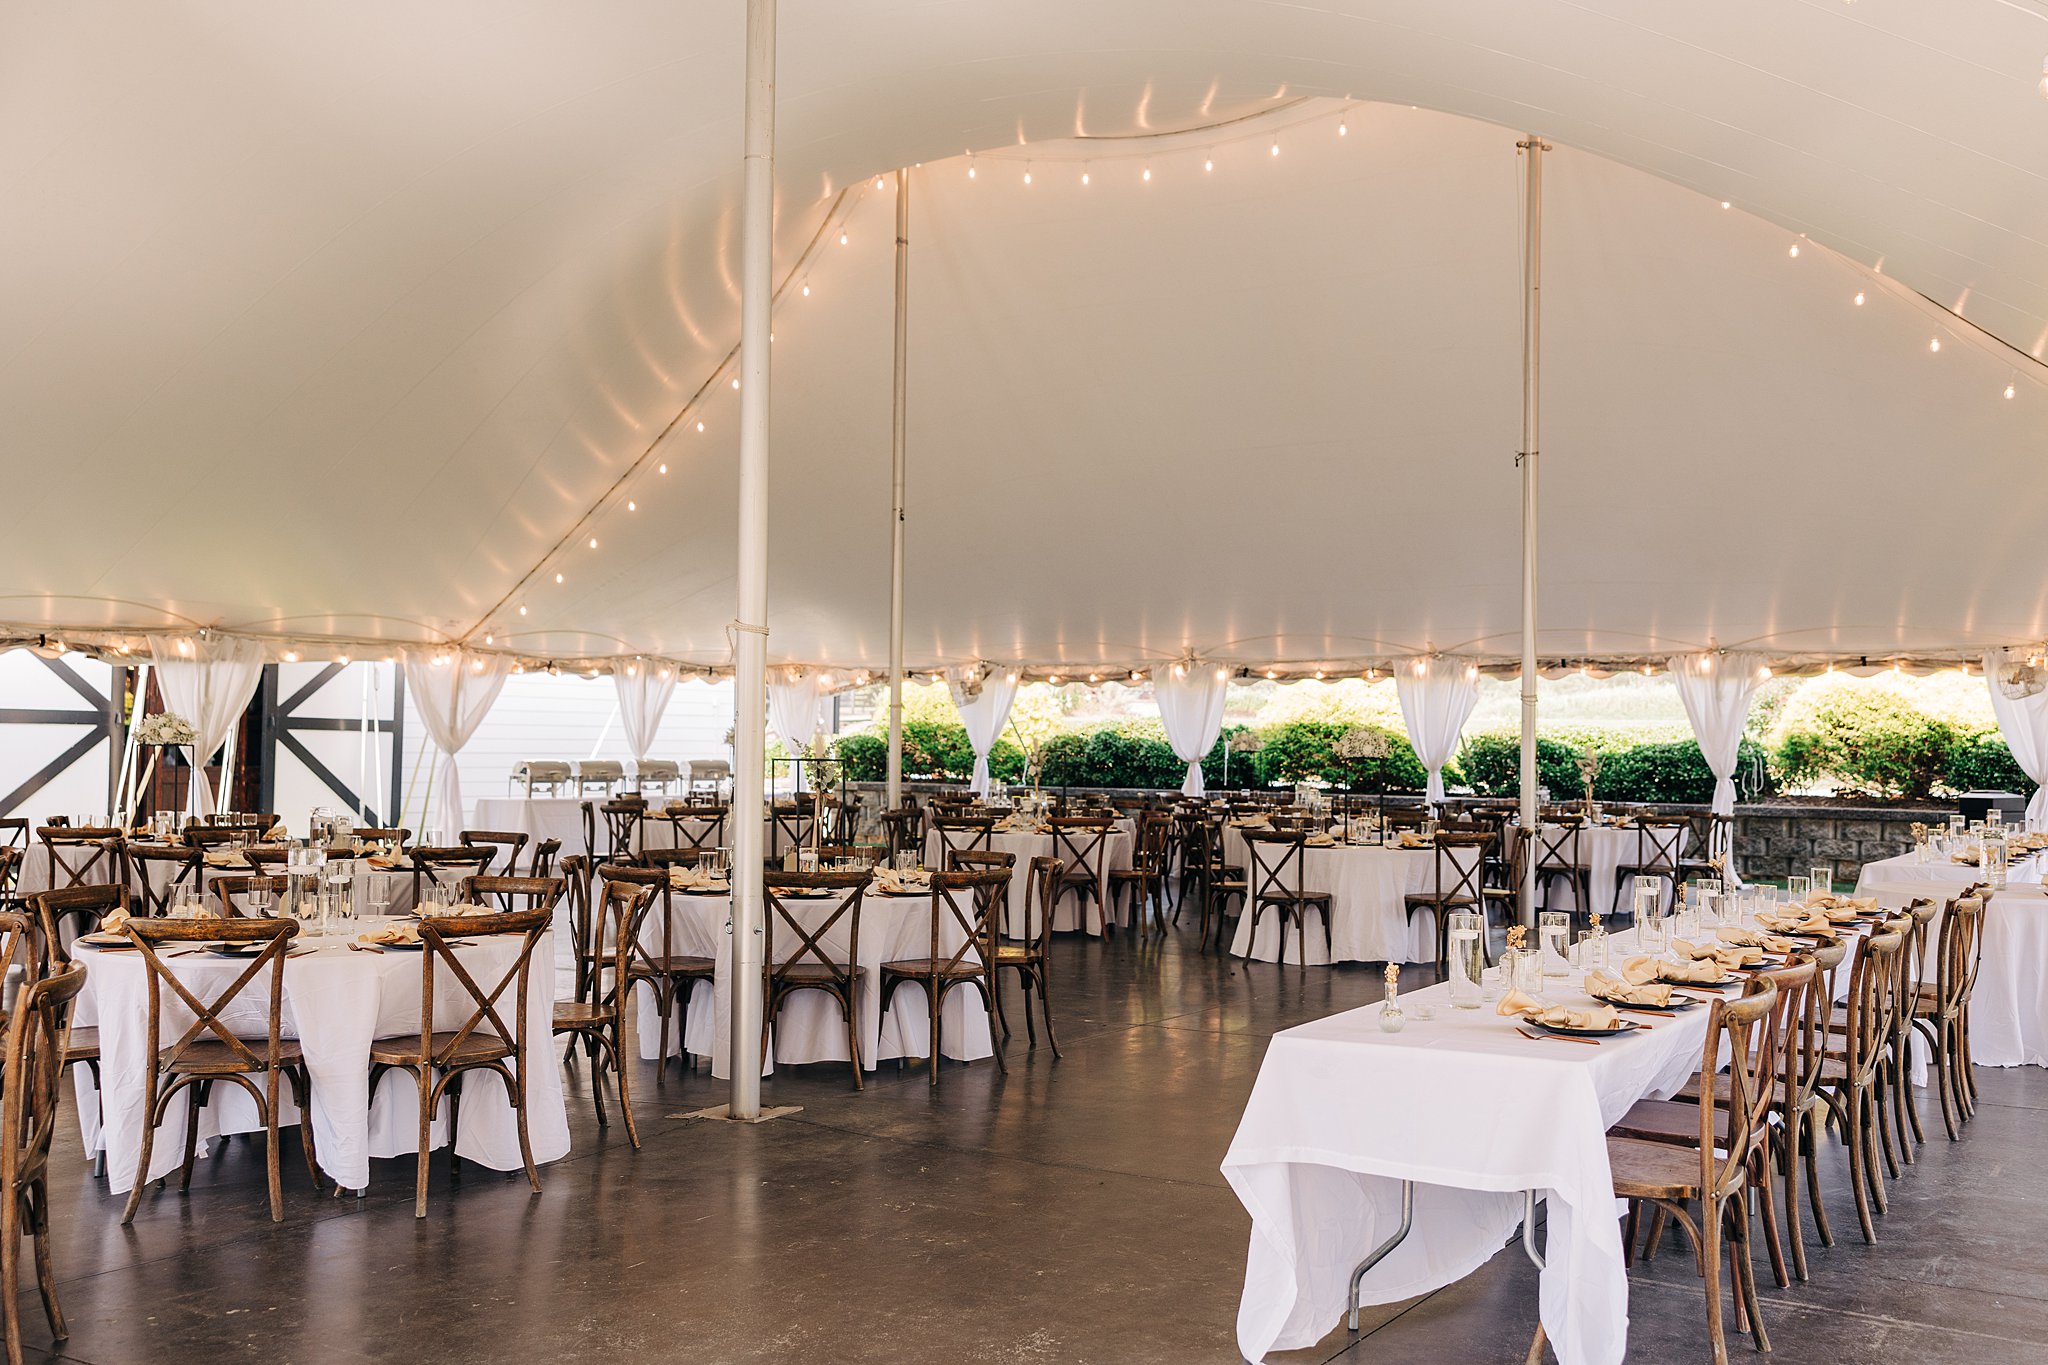 Details of an outdoor tent wedding reception set up with wooden chairs and market lights at the Summerfield Farms wedding venue